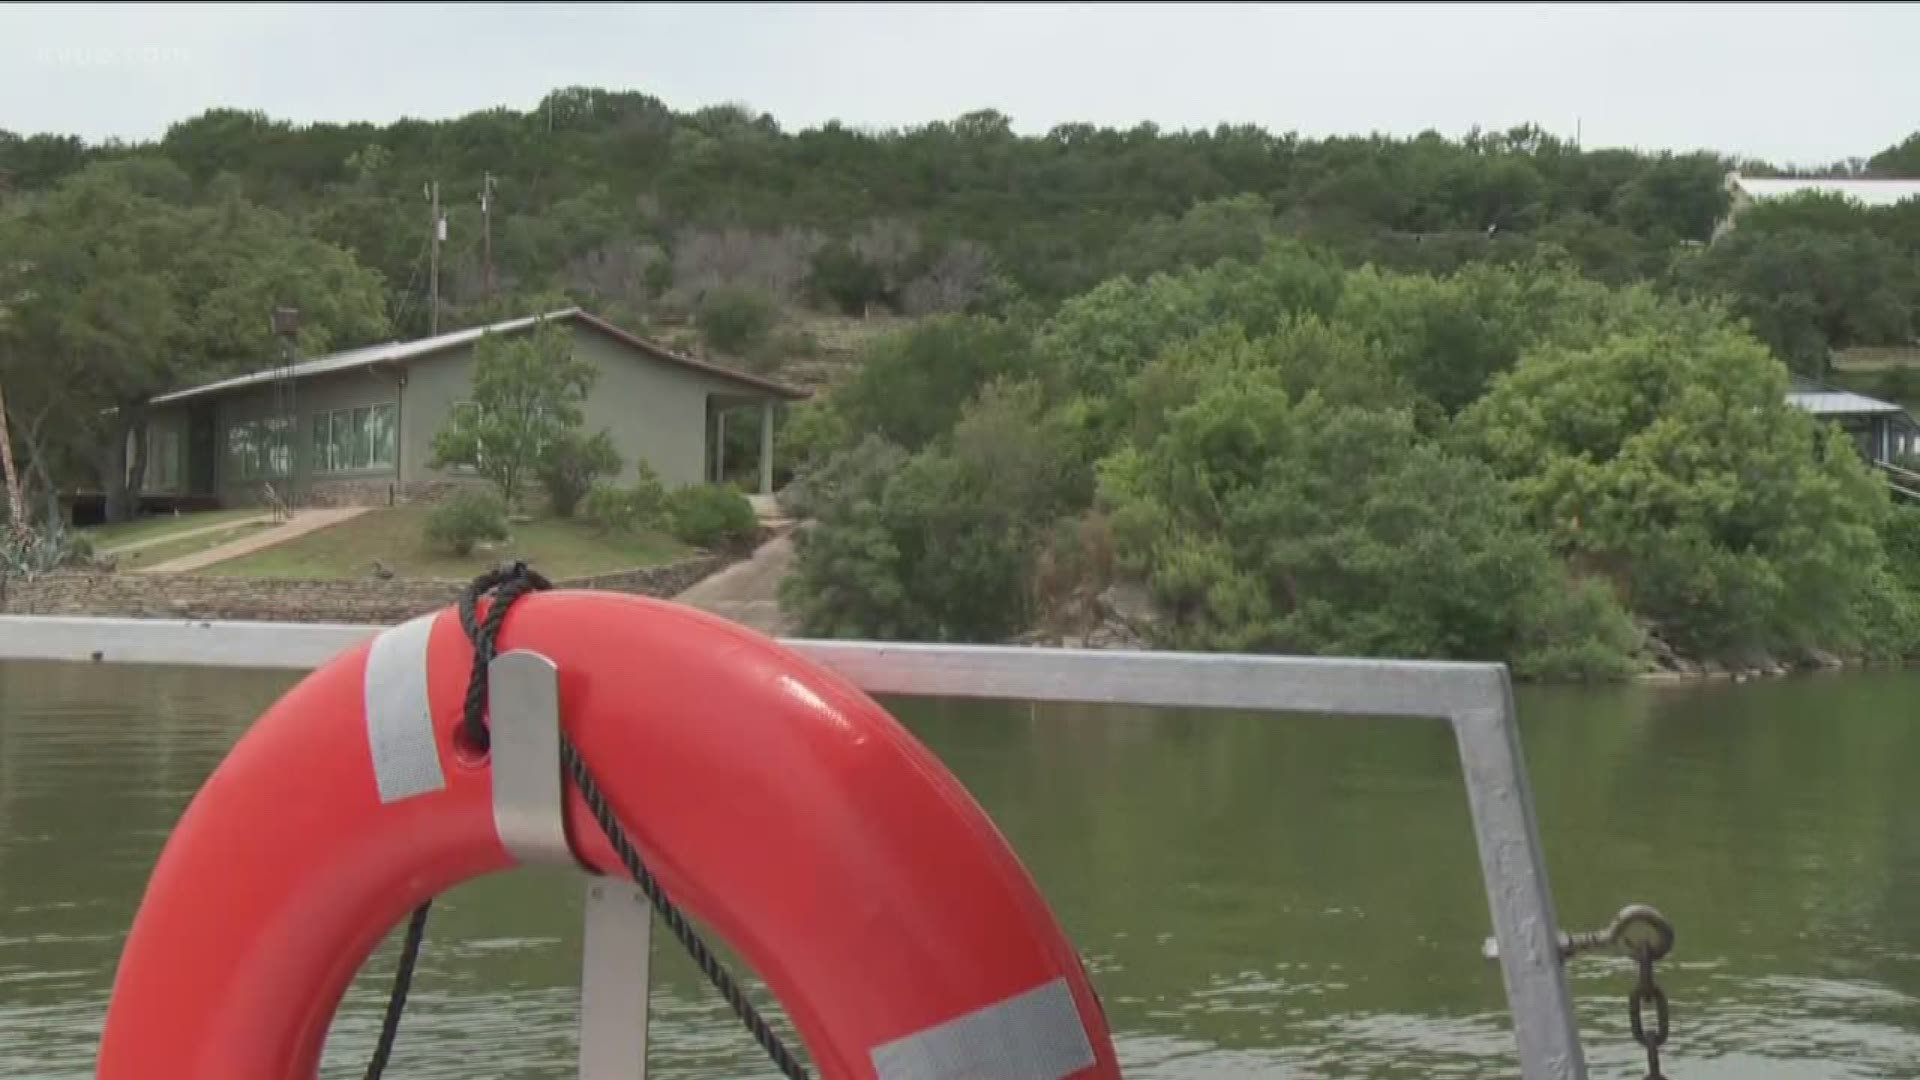 About 80 people were rescued from a boat that got caught out on the water during Sunday evening's storms on Lake Buchanan.